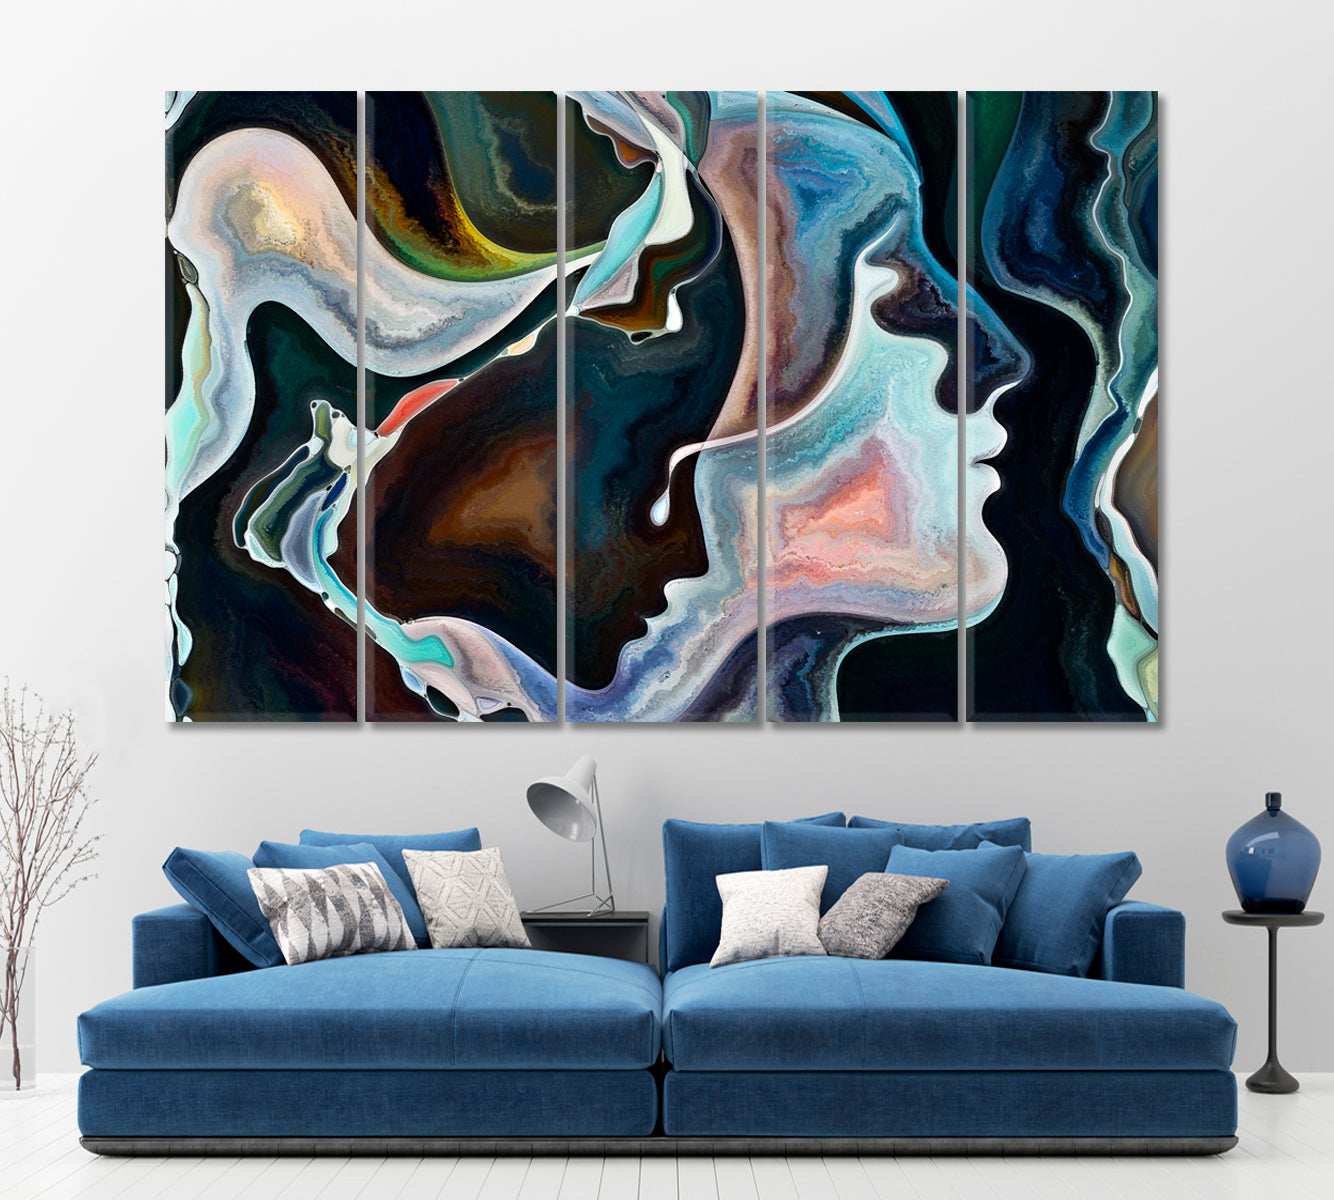 CONSCIOUSNESS Figurative Abstract Expressionism Consciousness Art Artesty 5 panels 36" x 24" 